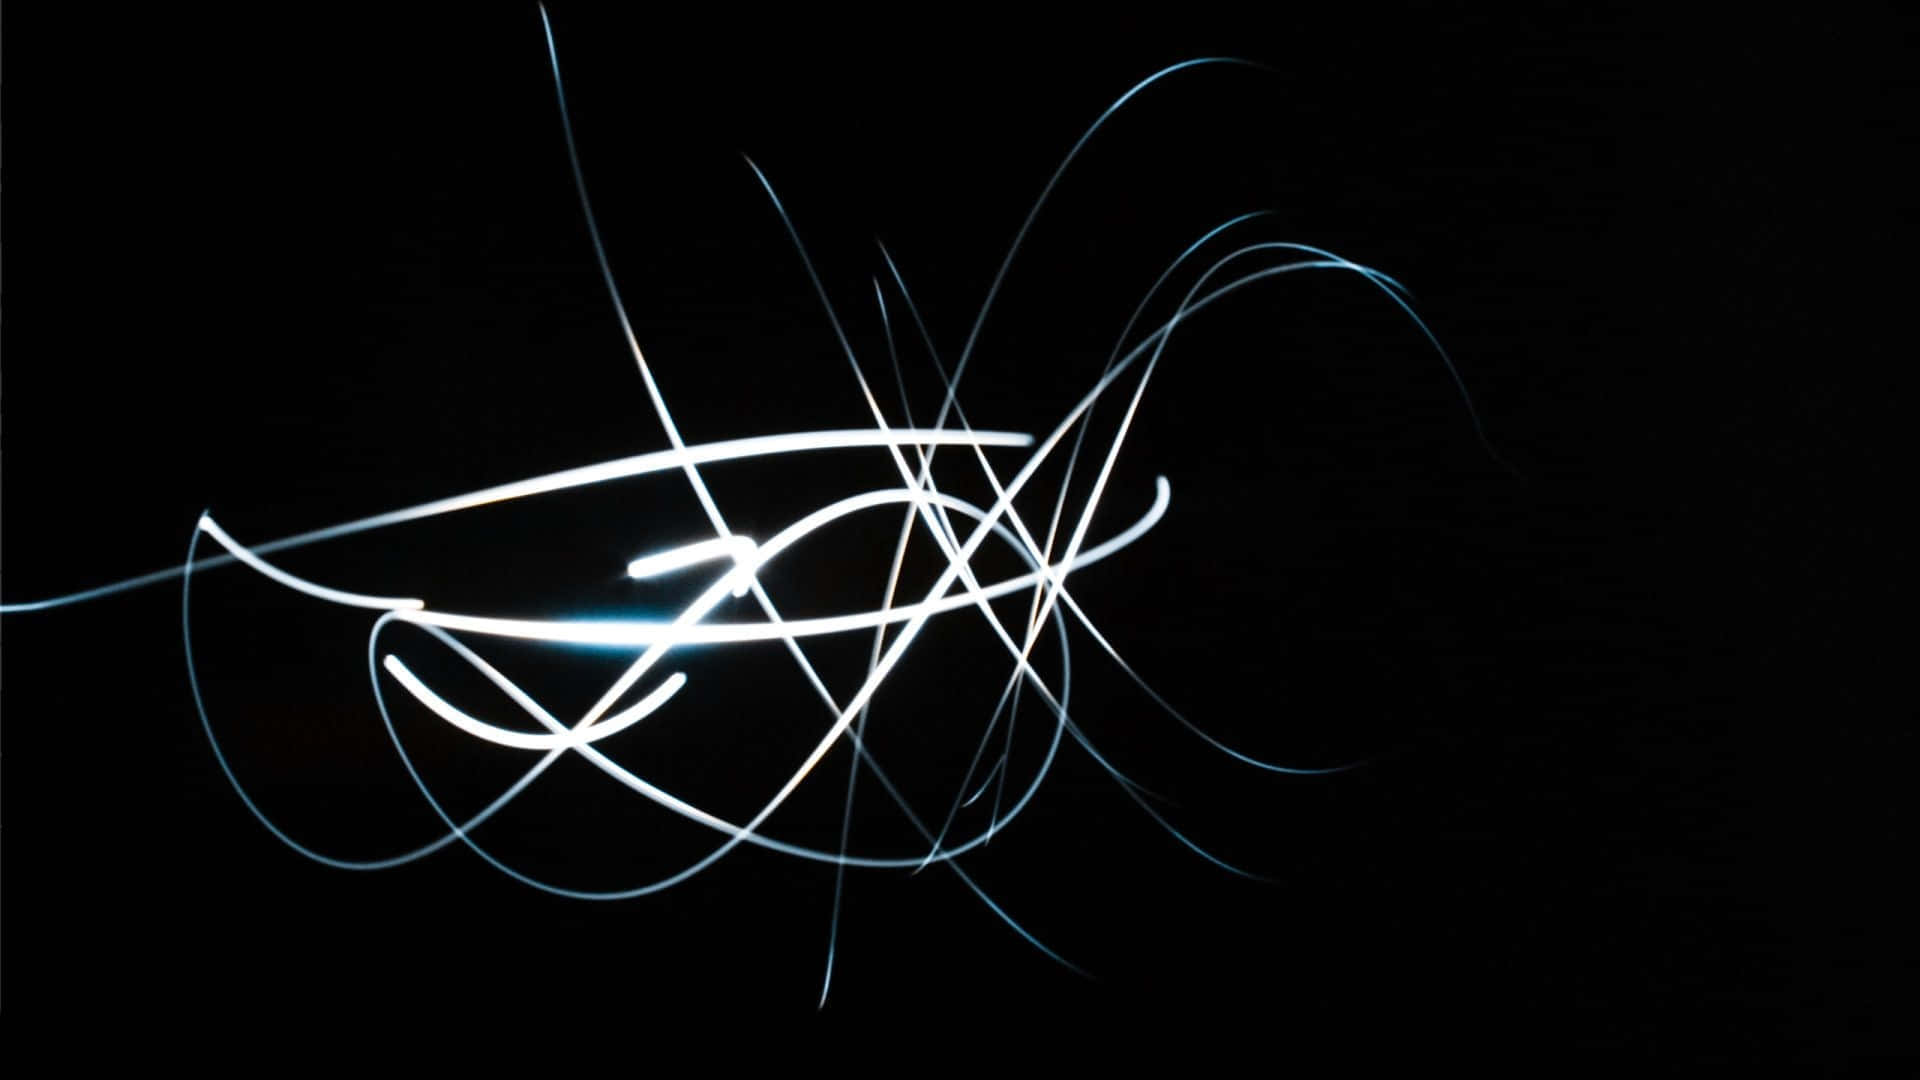 A Light Painting On A Black Background Wallpaper